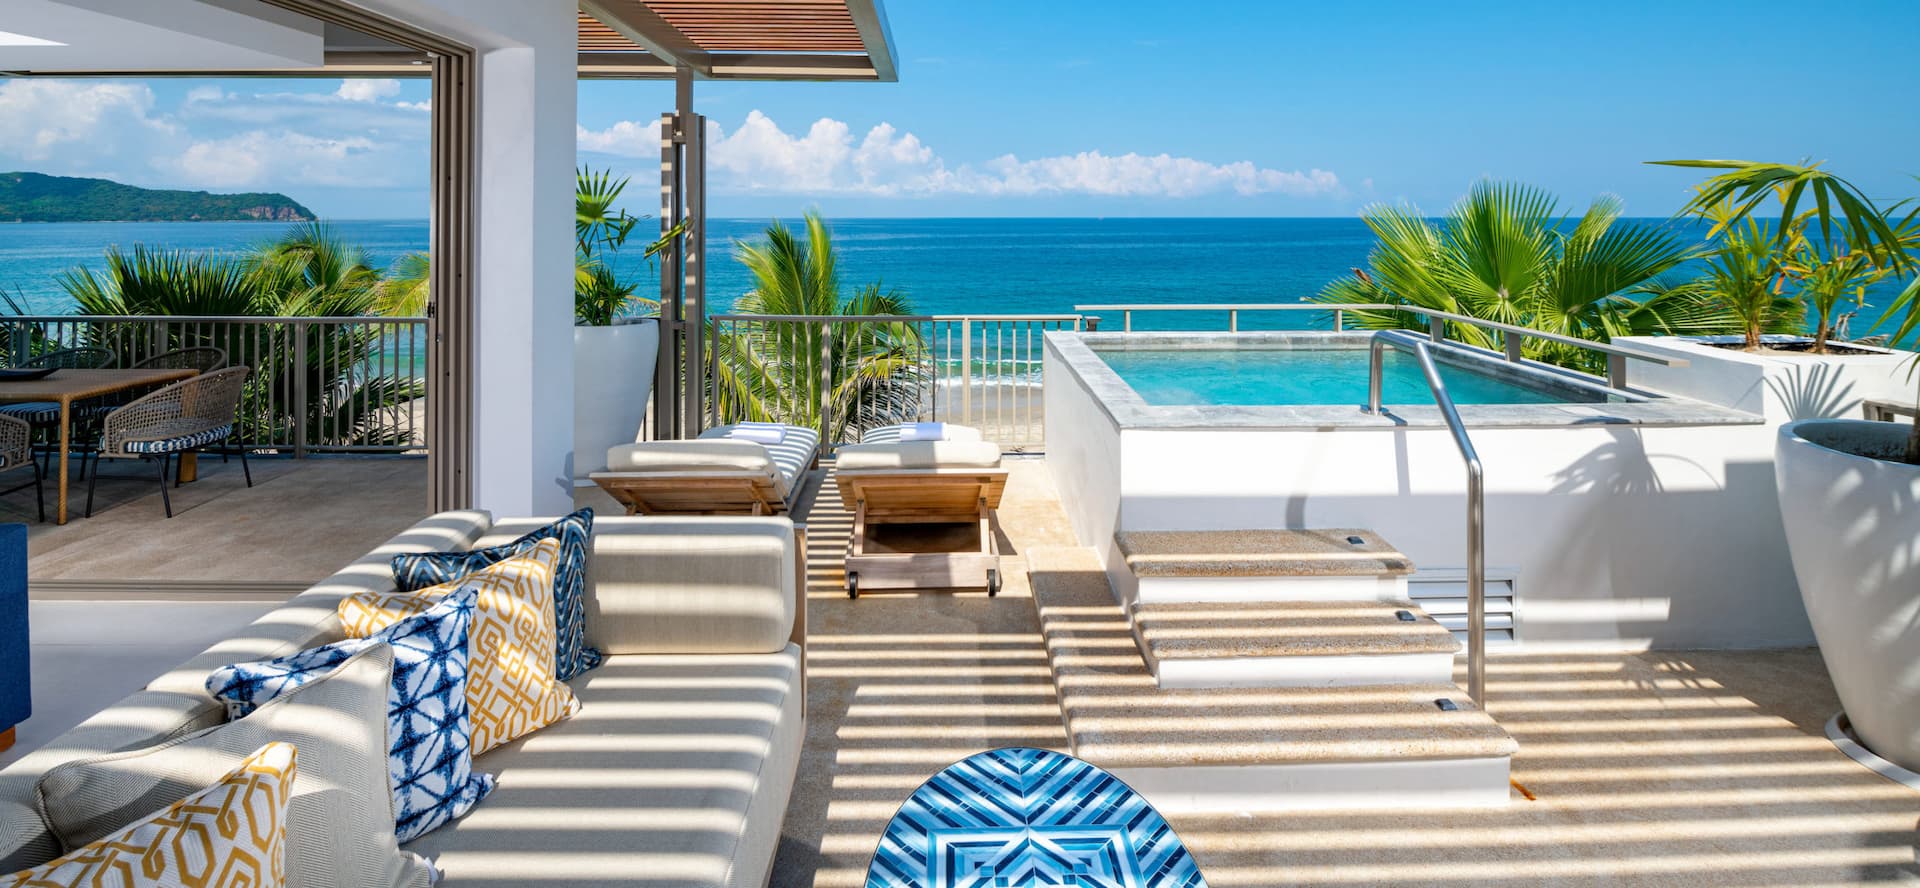 The house showcases a corner terrace pool overlooking a stunning ocean panorama.